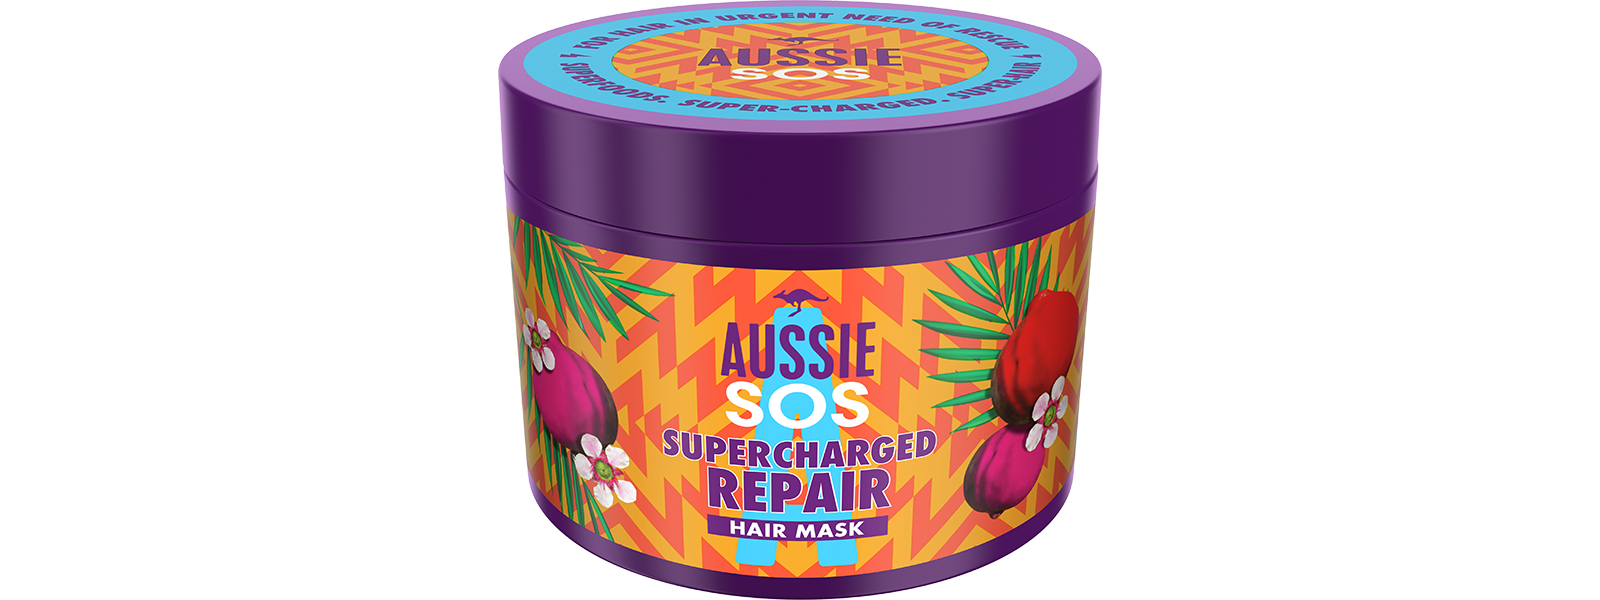 An image of Aussie SOS Supercharged Repair Hair Mask package